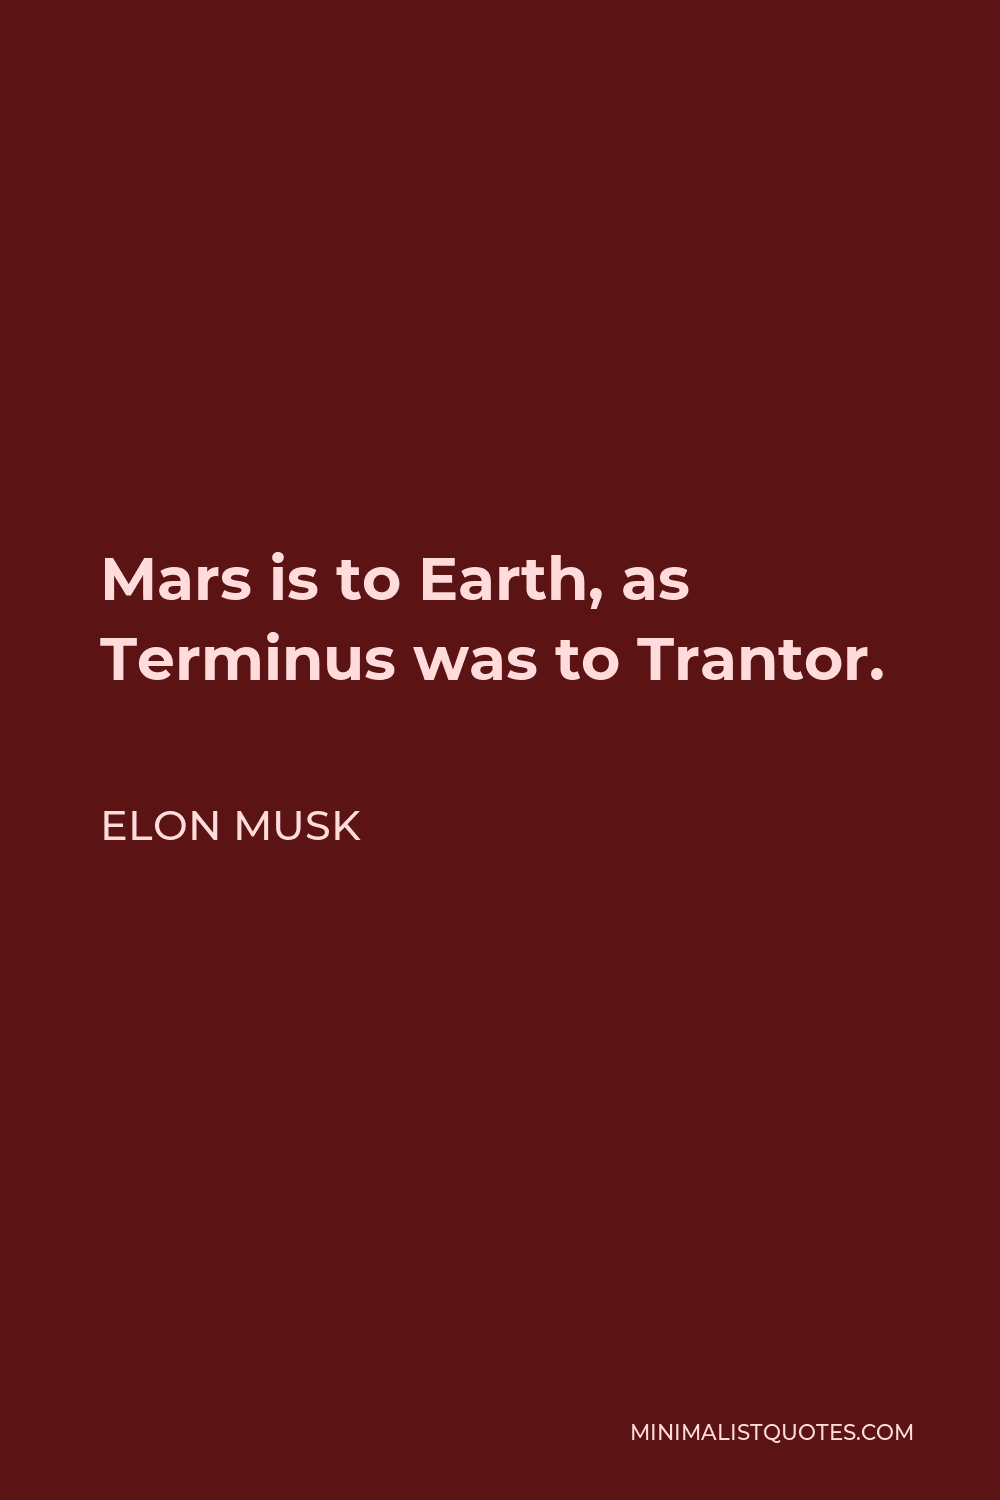 Elon Musk Quote - Mars is to Earth, as Terminus was to Trantor.